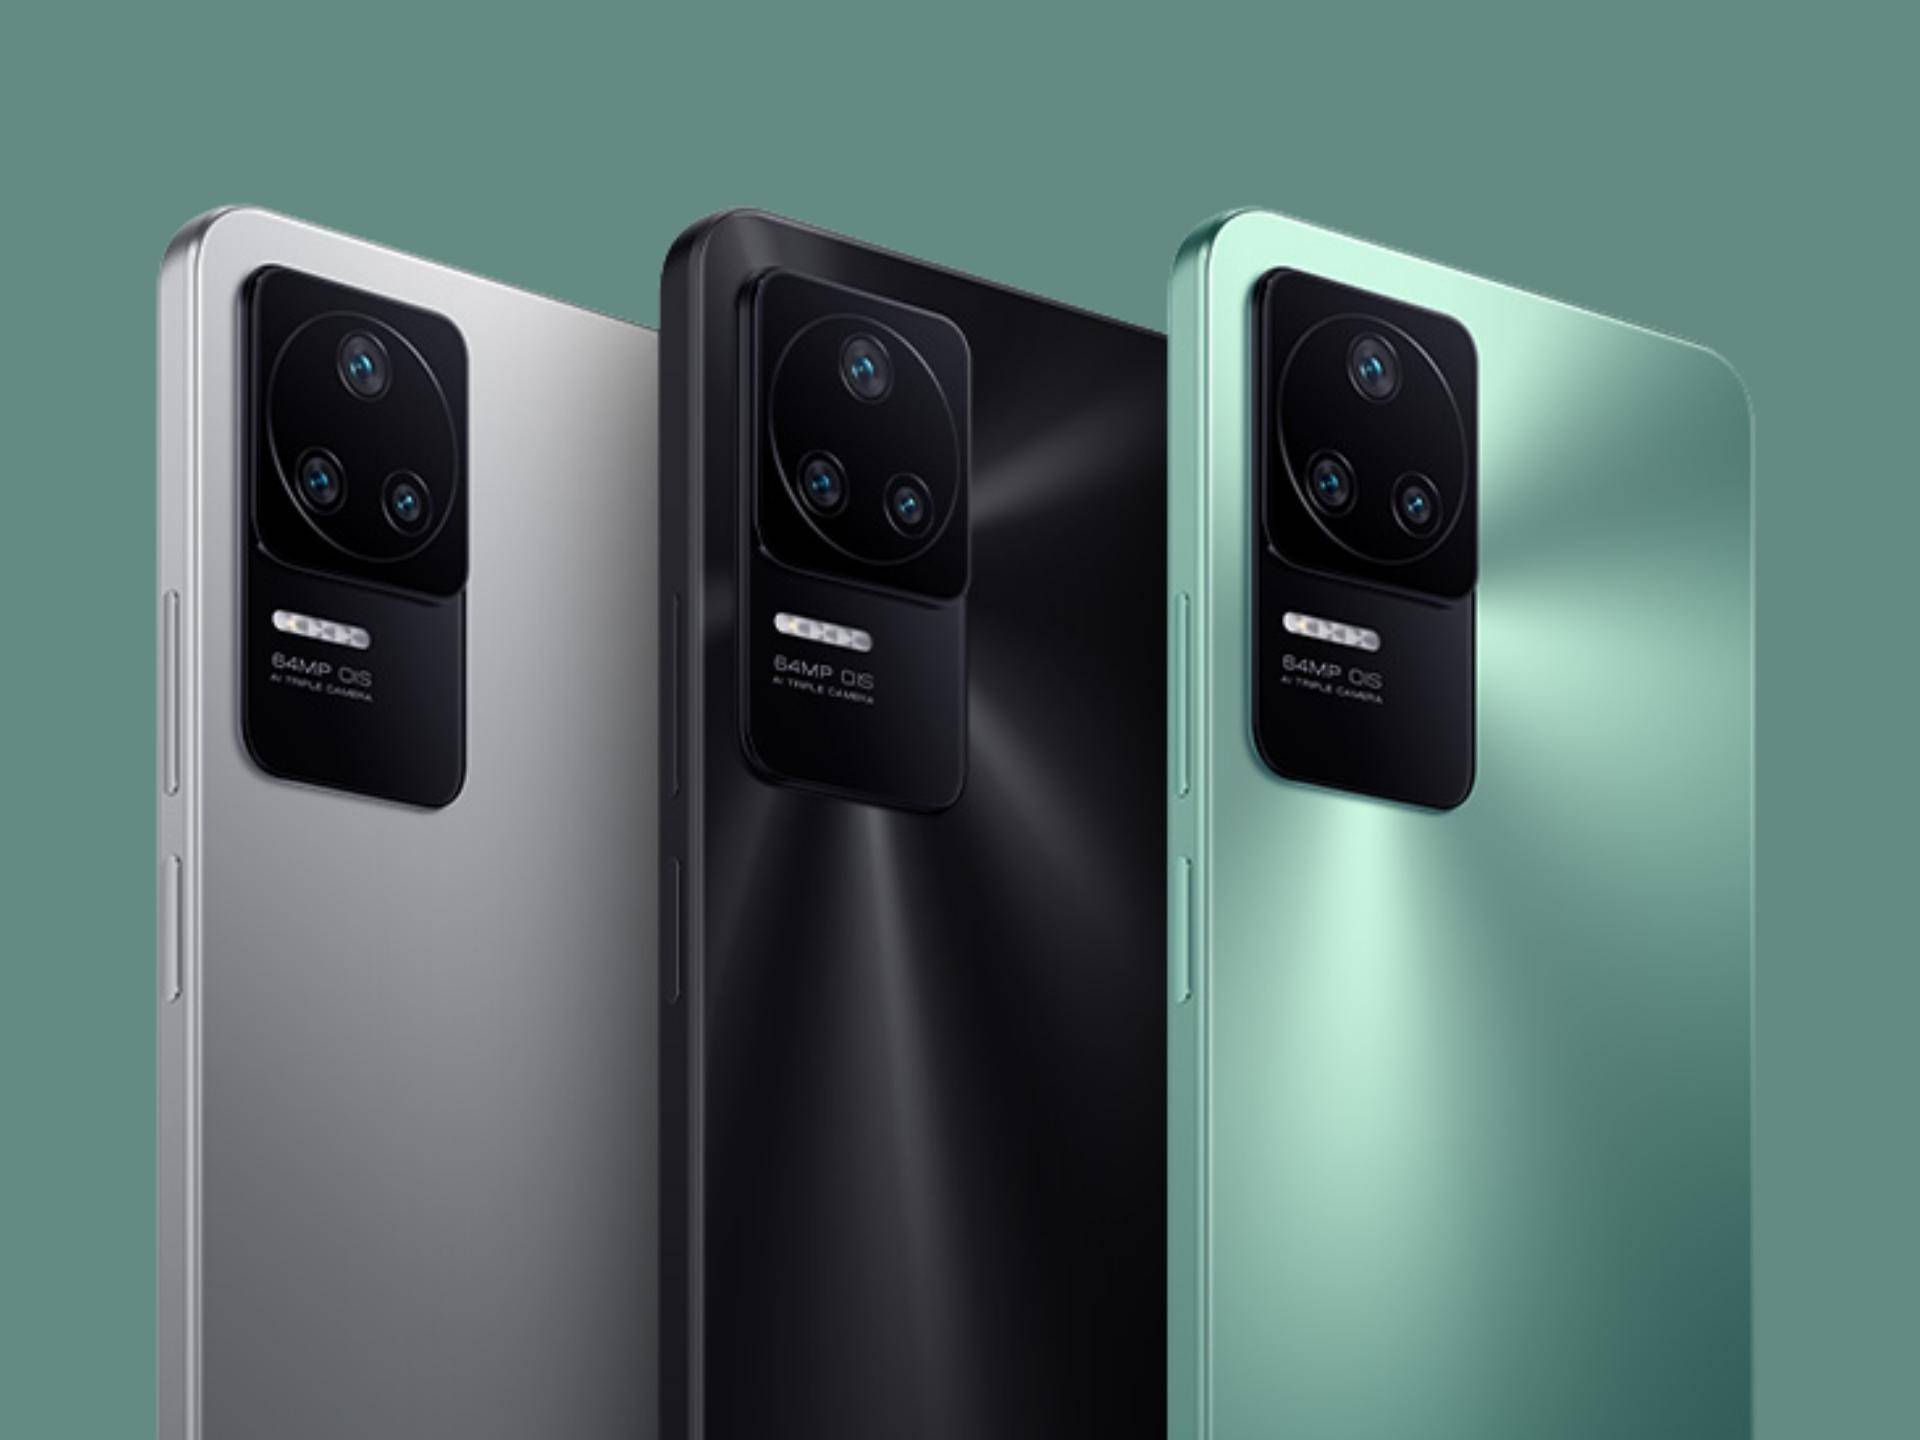 poco f4 and its three colors, silver, black, and green (from left to right)